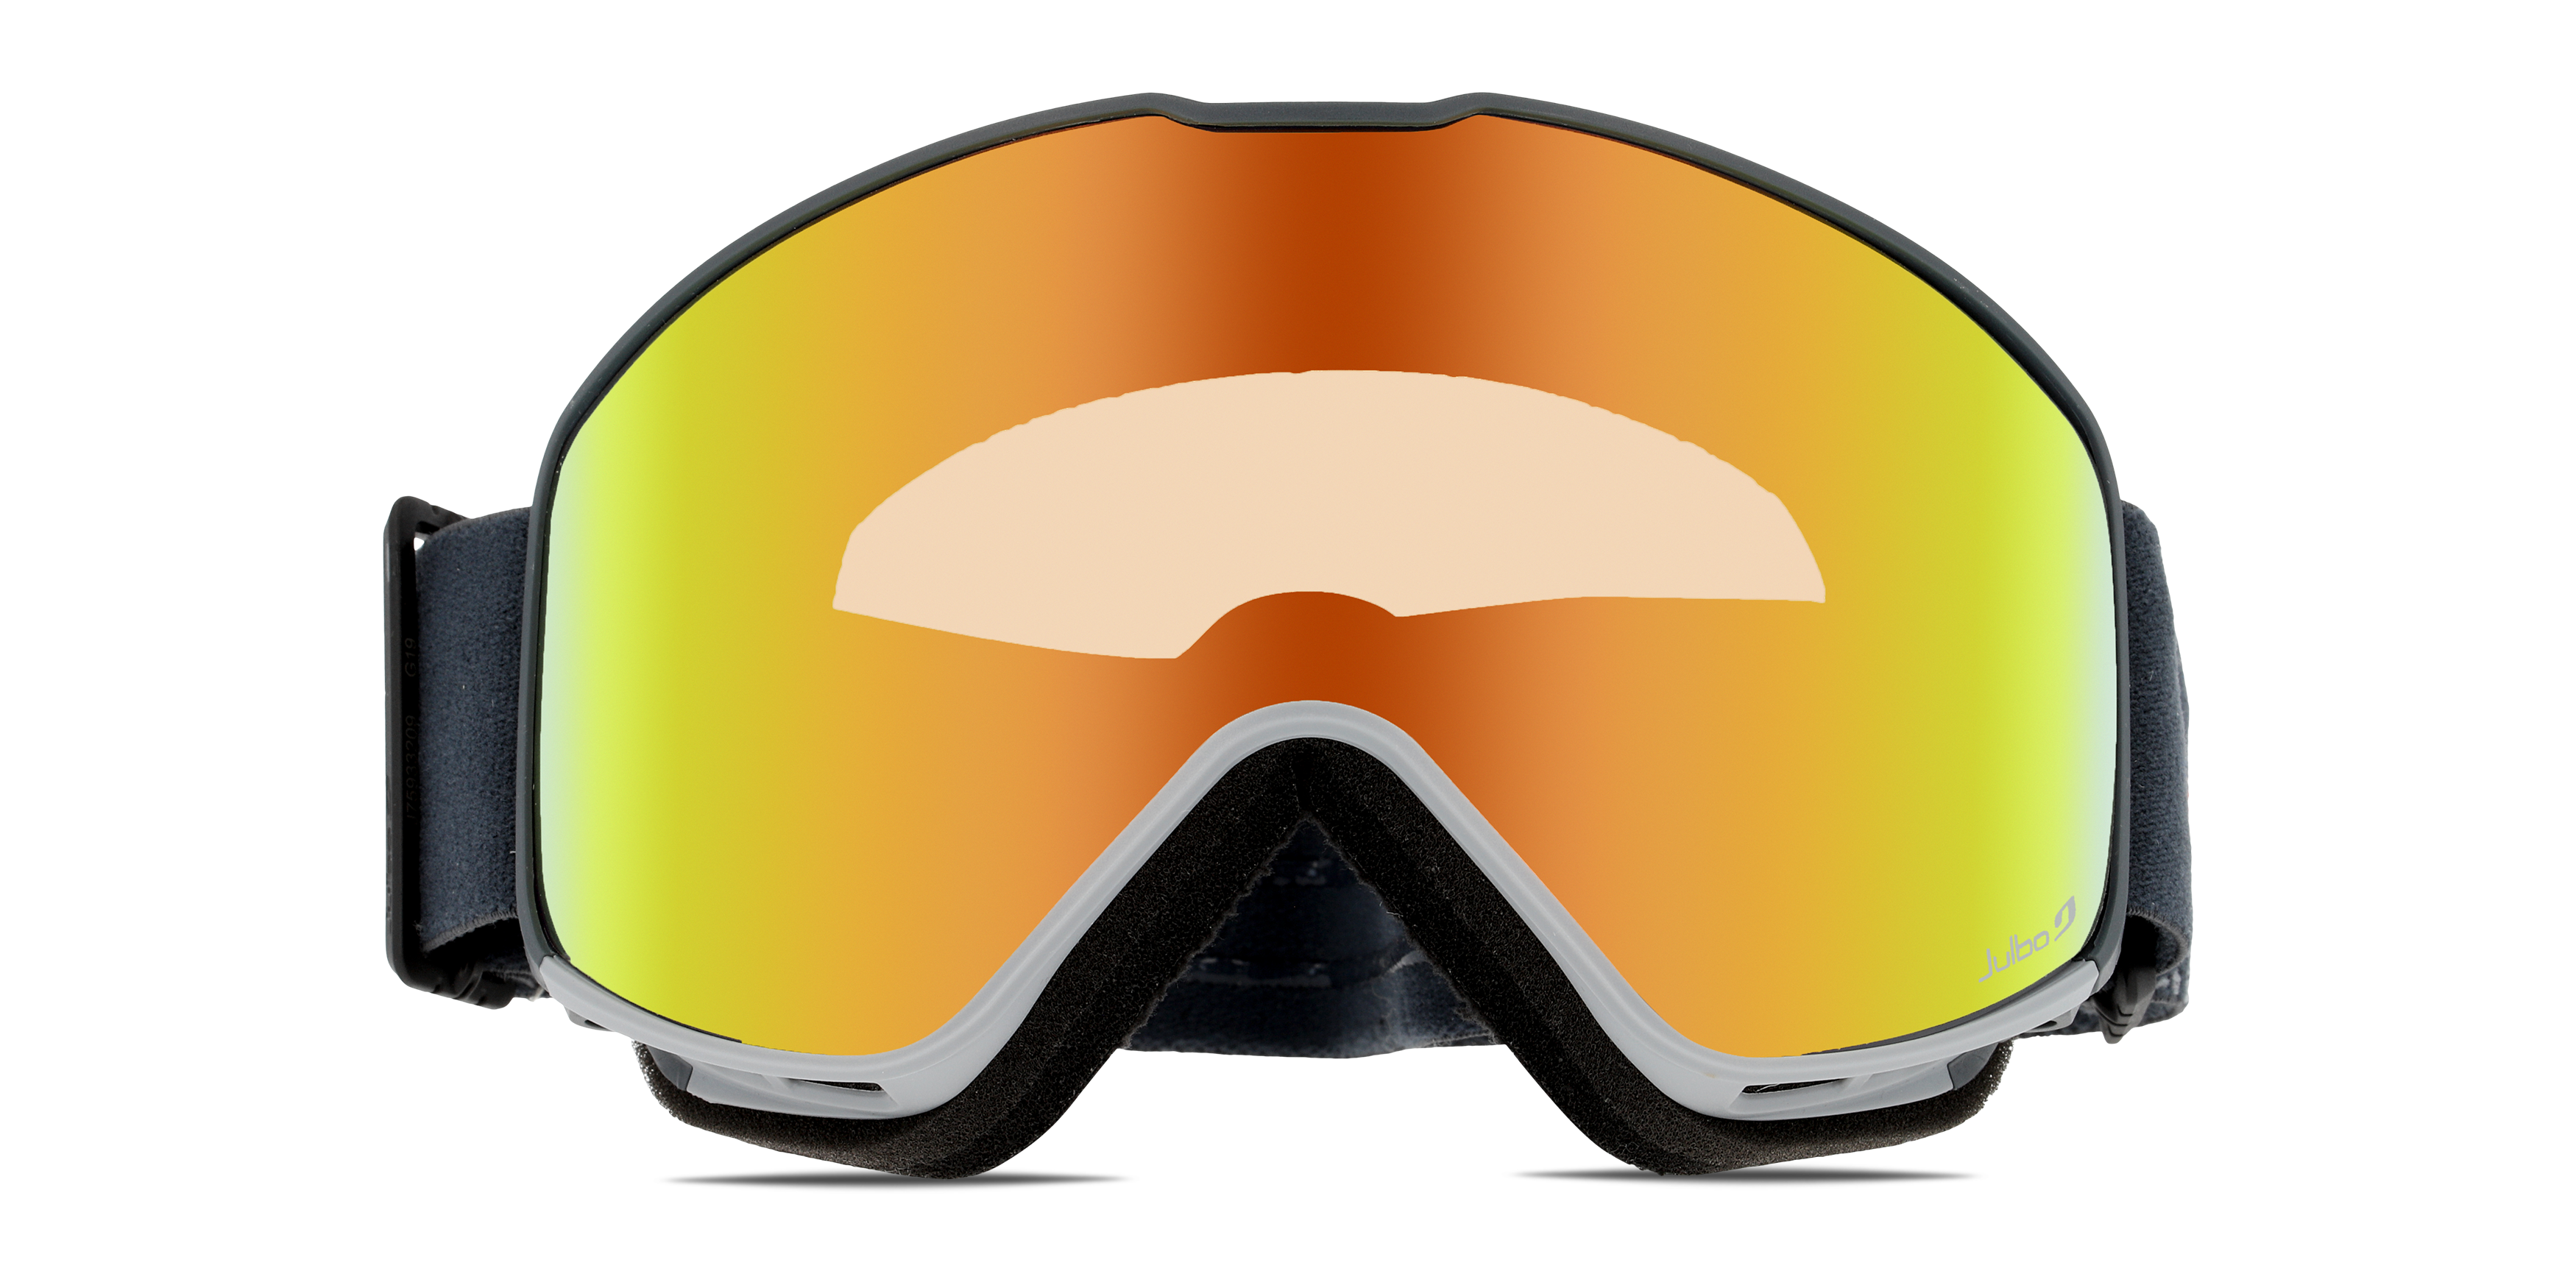 [products.image.front] JULBO J759 CYRIUS 20